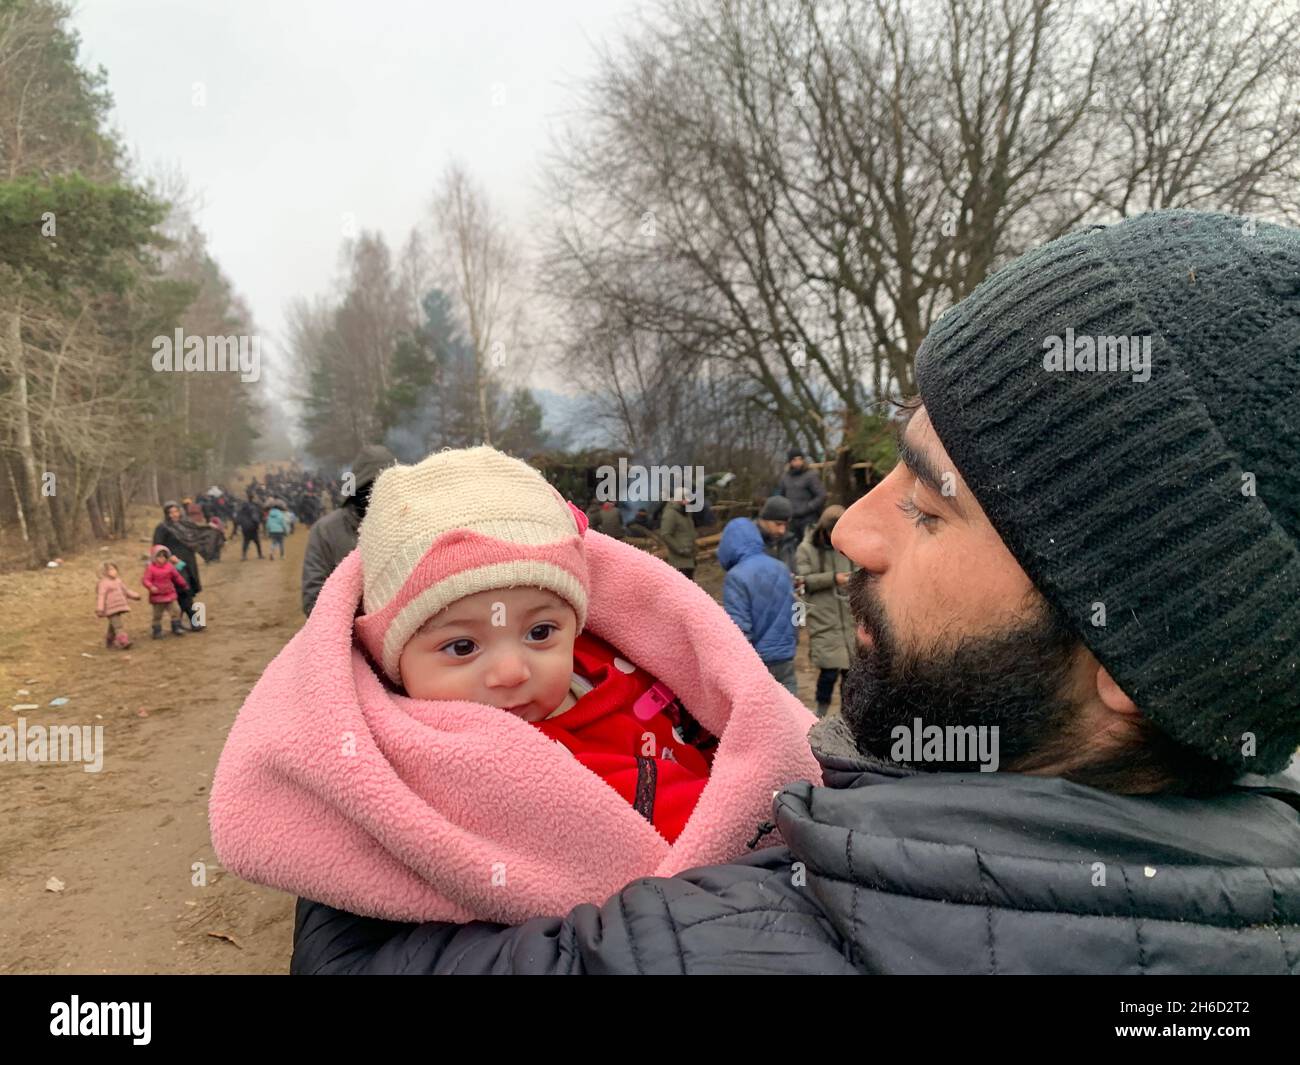 Grodno. 14th Nov, 2021. A refugee carries an infant at a refugee camp near the Belarusian-Polish border in Belarus, Nov. 14, 2021. Belarusian President Alexander Lukashenko ordered on Nov. 13 to set up tents and distribute relief supplies to refugees gathered near the Belarusian-Polish border. Credit: Henadz Zhinkov/Xinhua/Alamy Live News Stock Photo